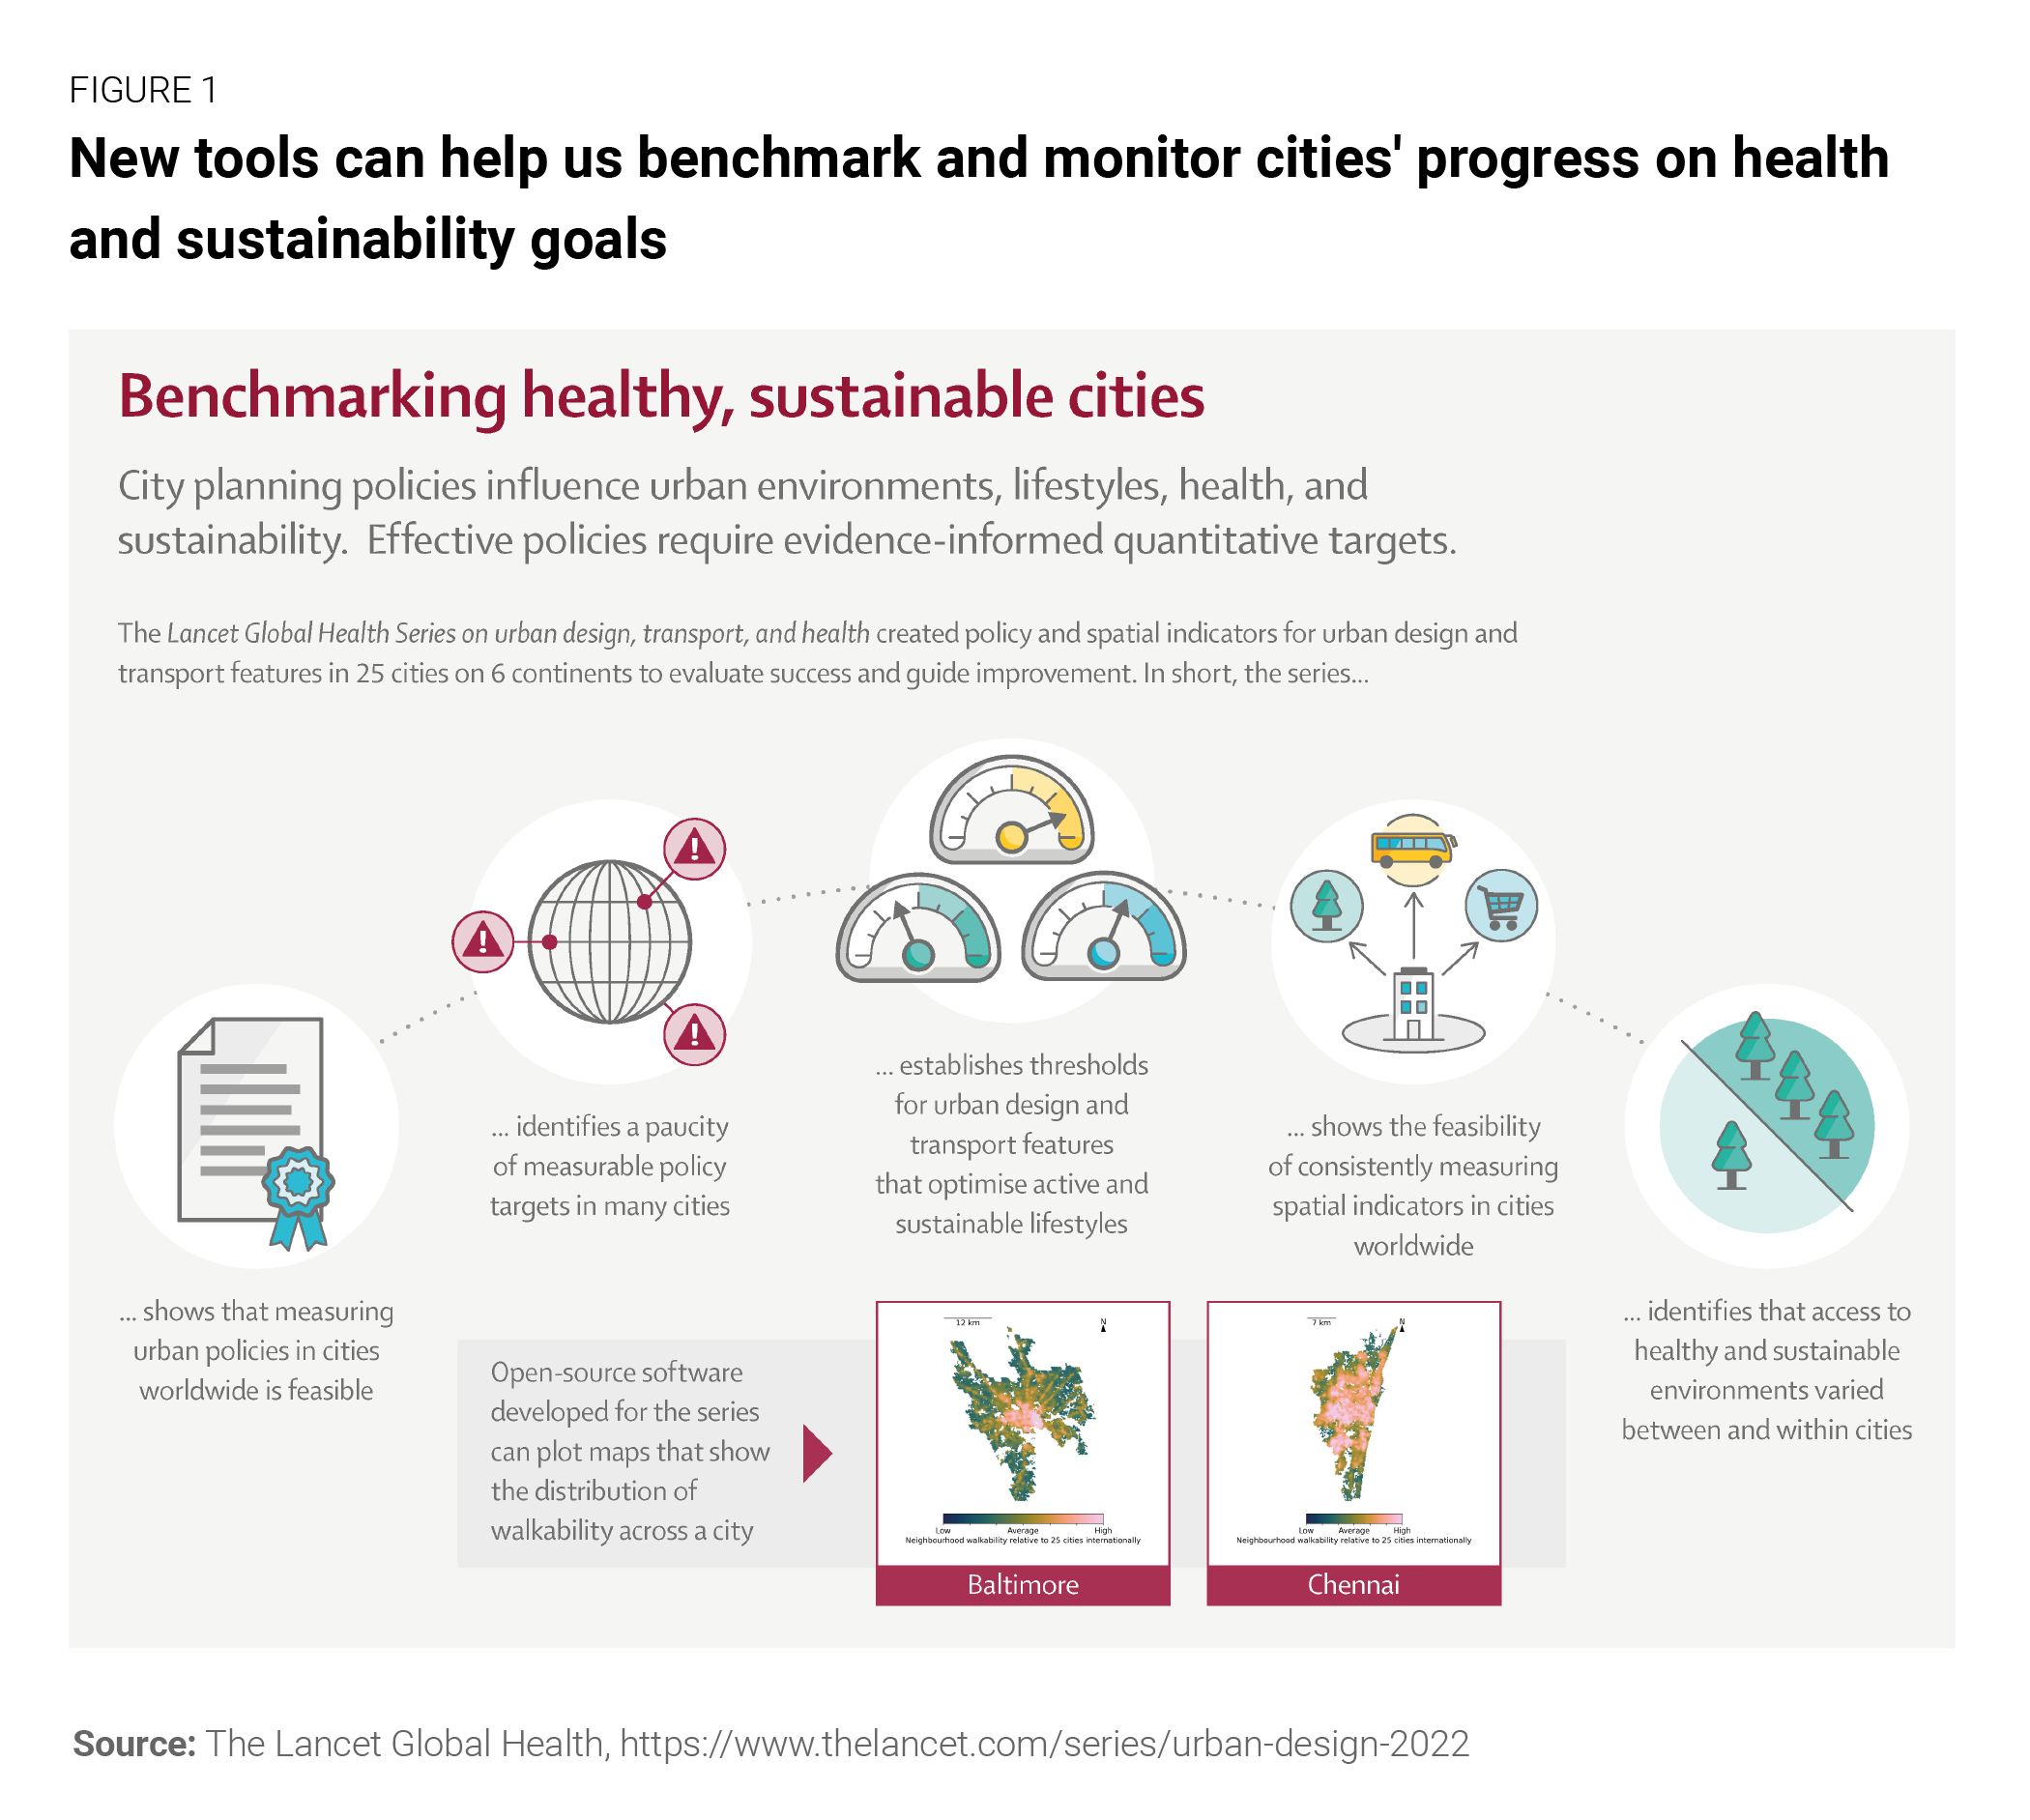 New tools can help us benchmark and monitor cities' progress on health and sustainability goals